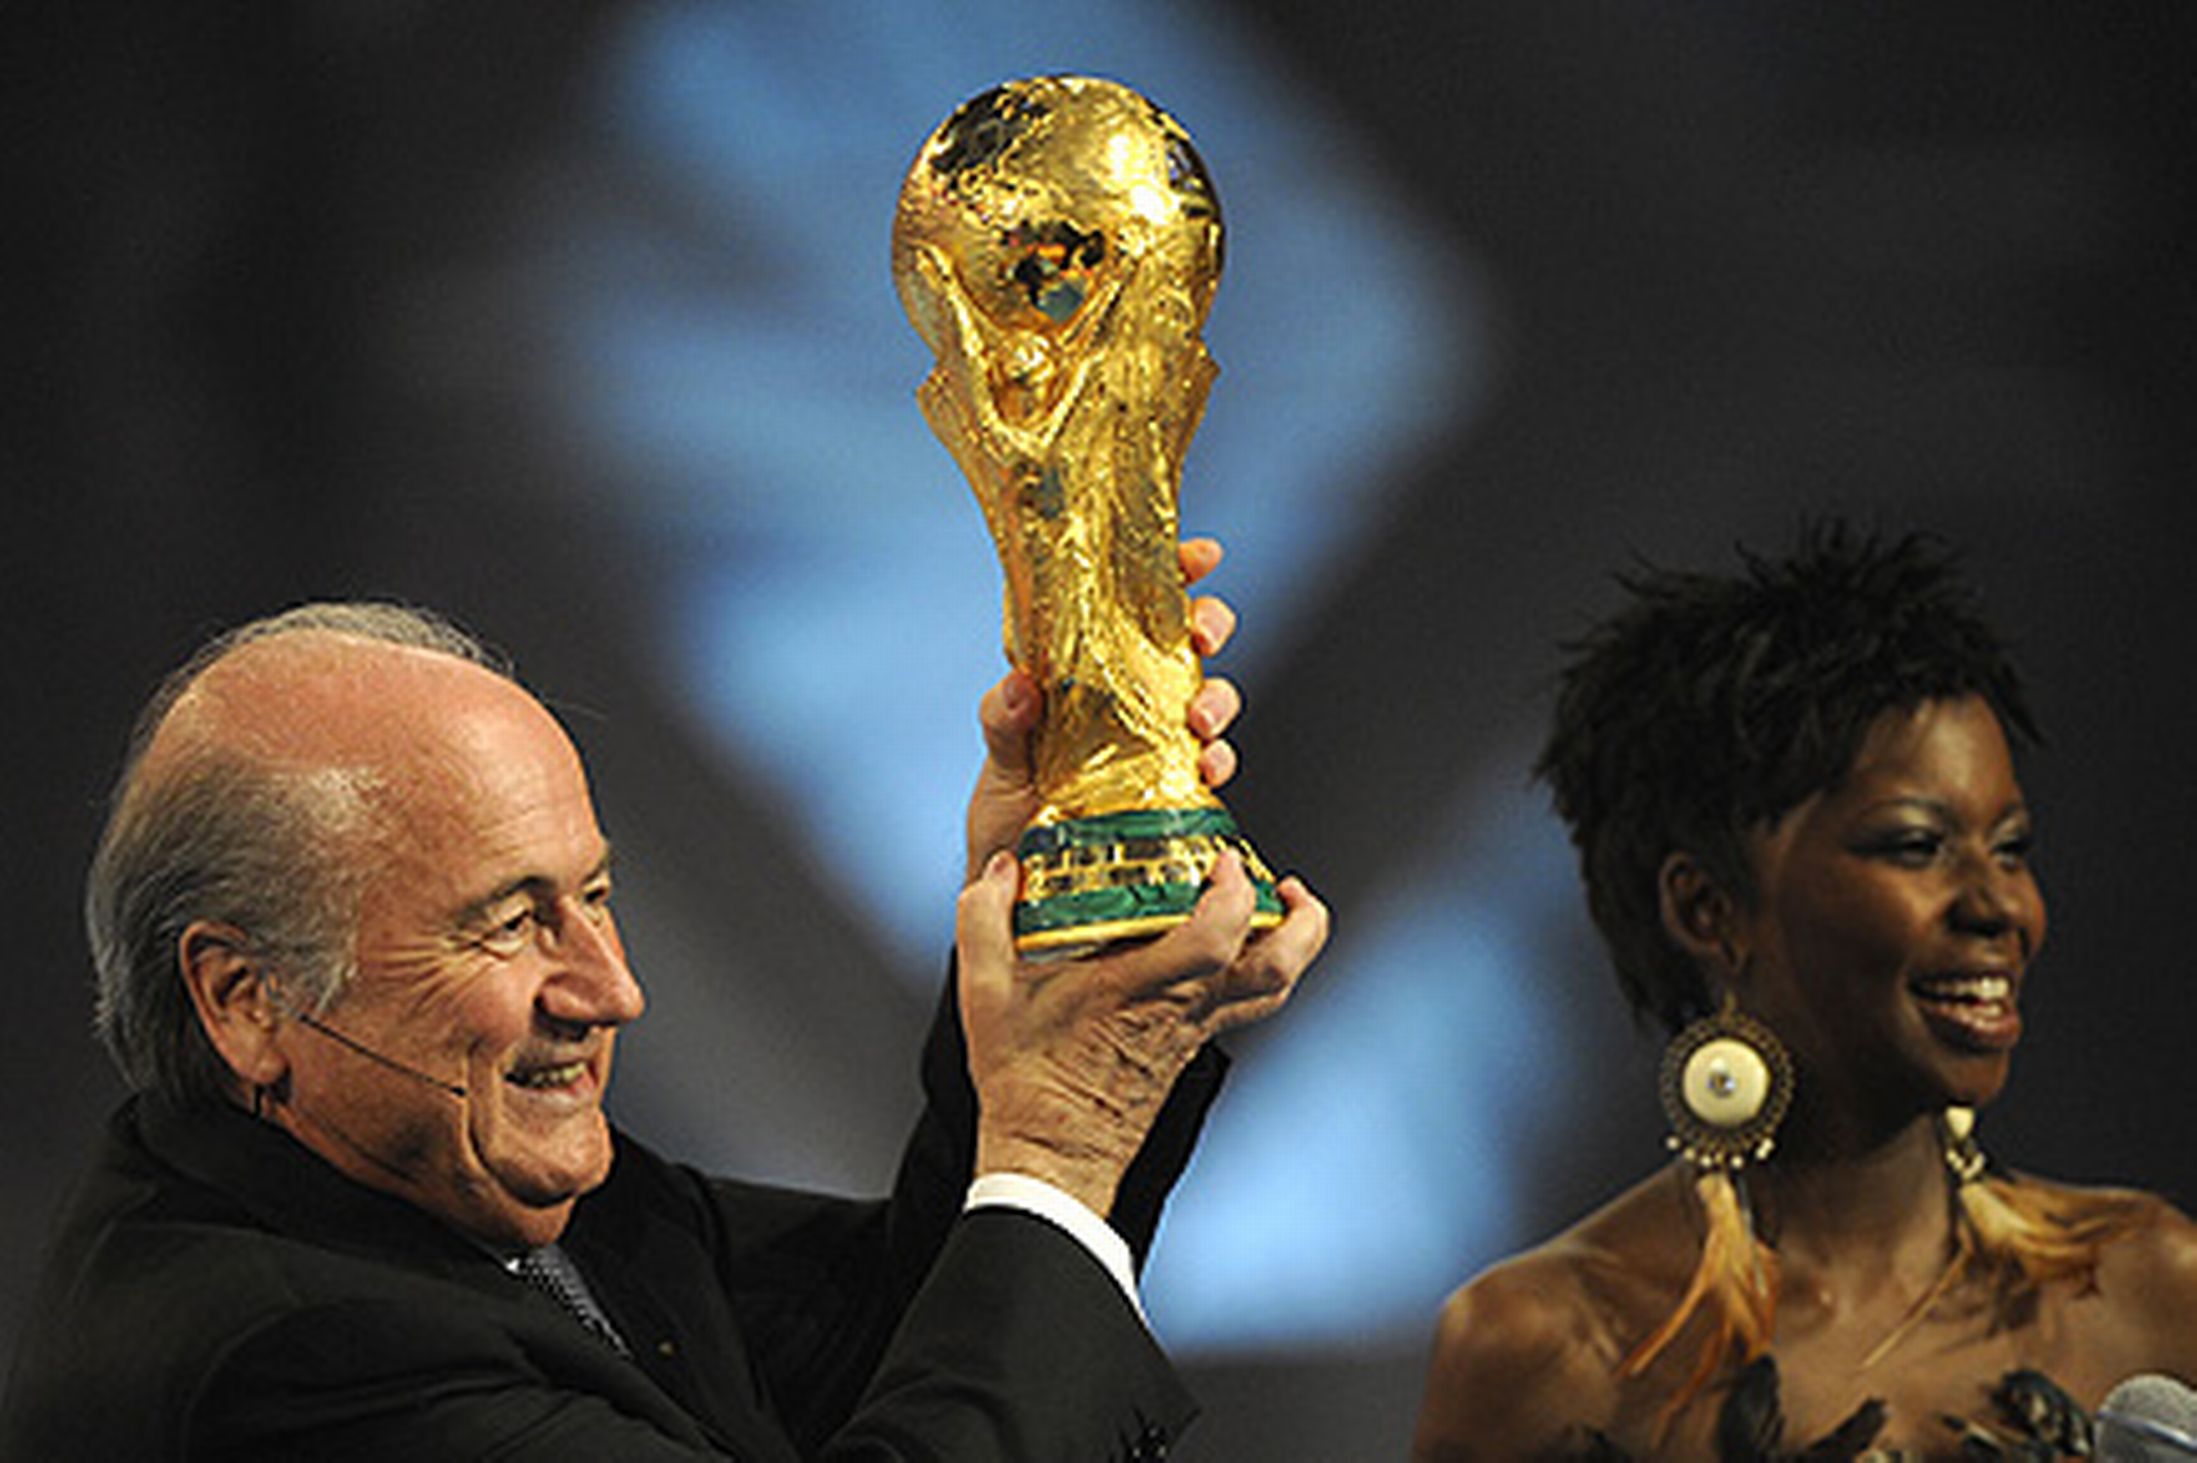 Sepp Blatter with World Cup